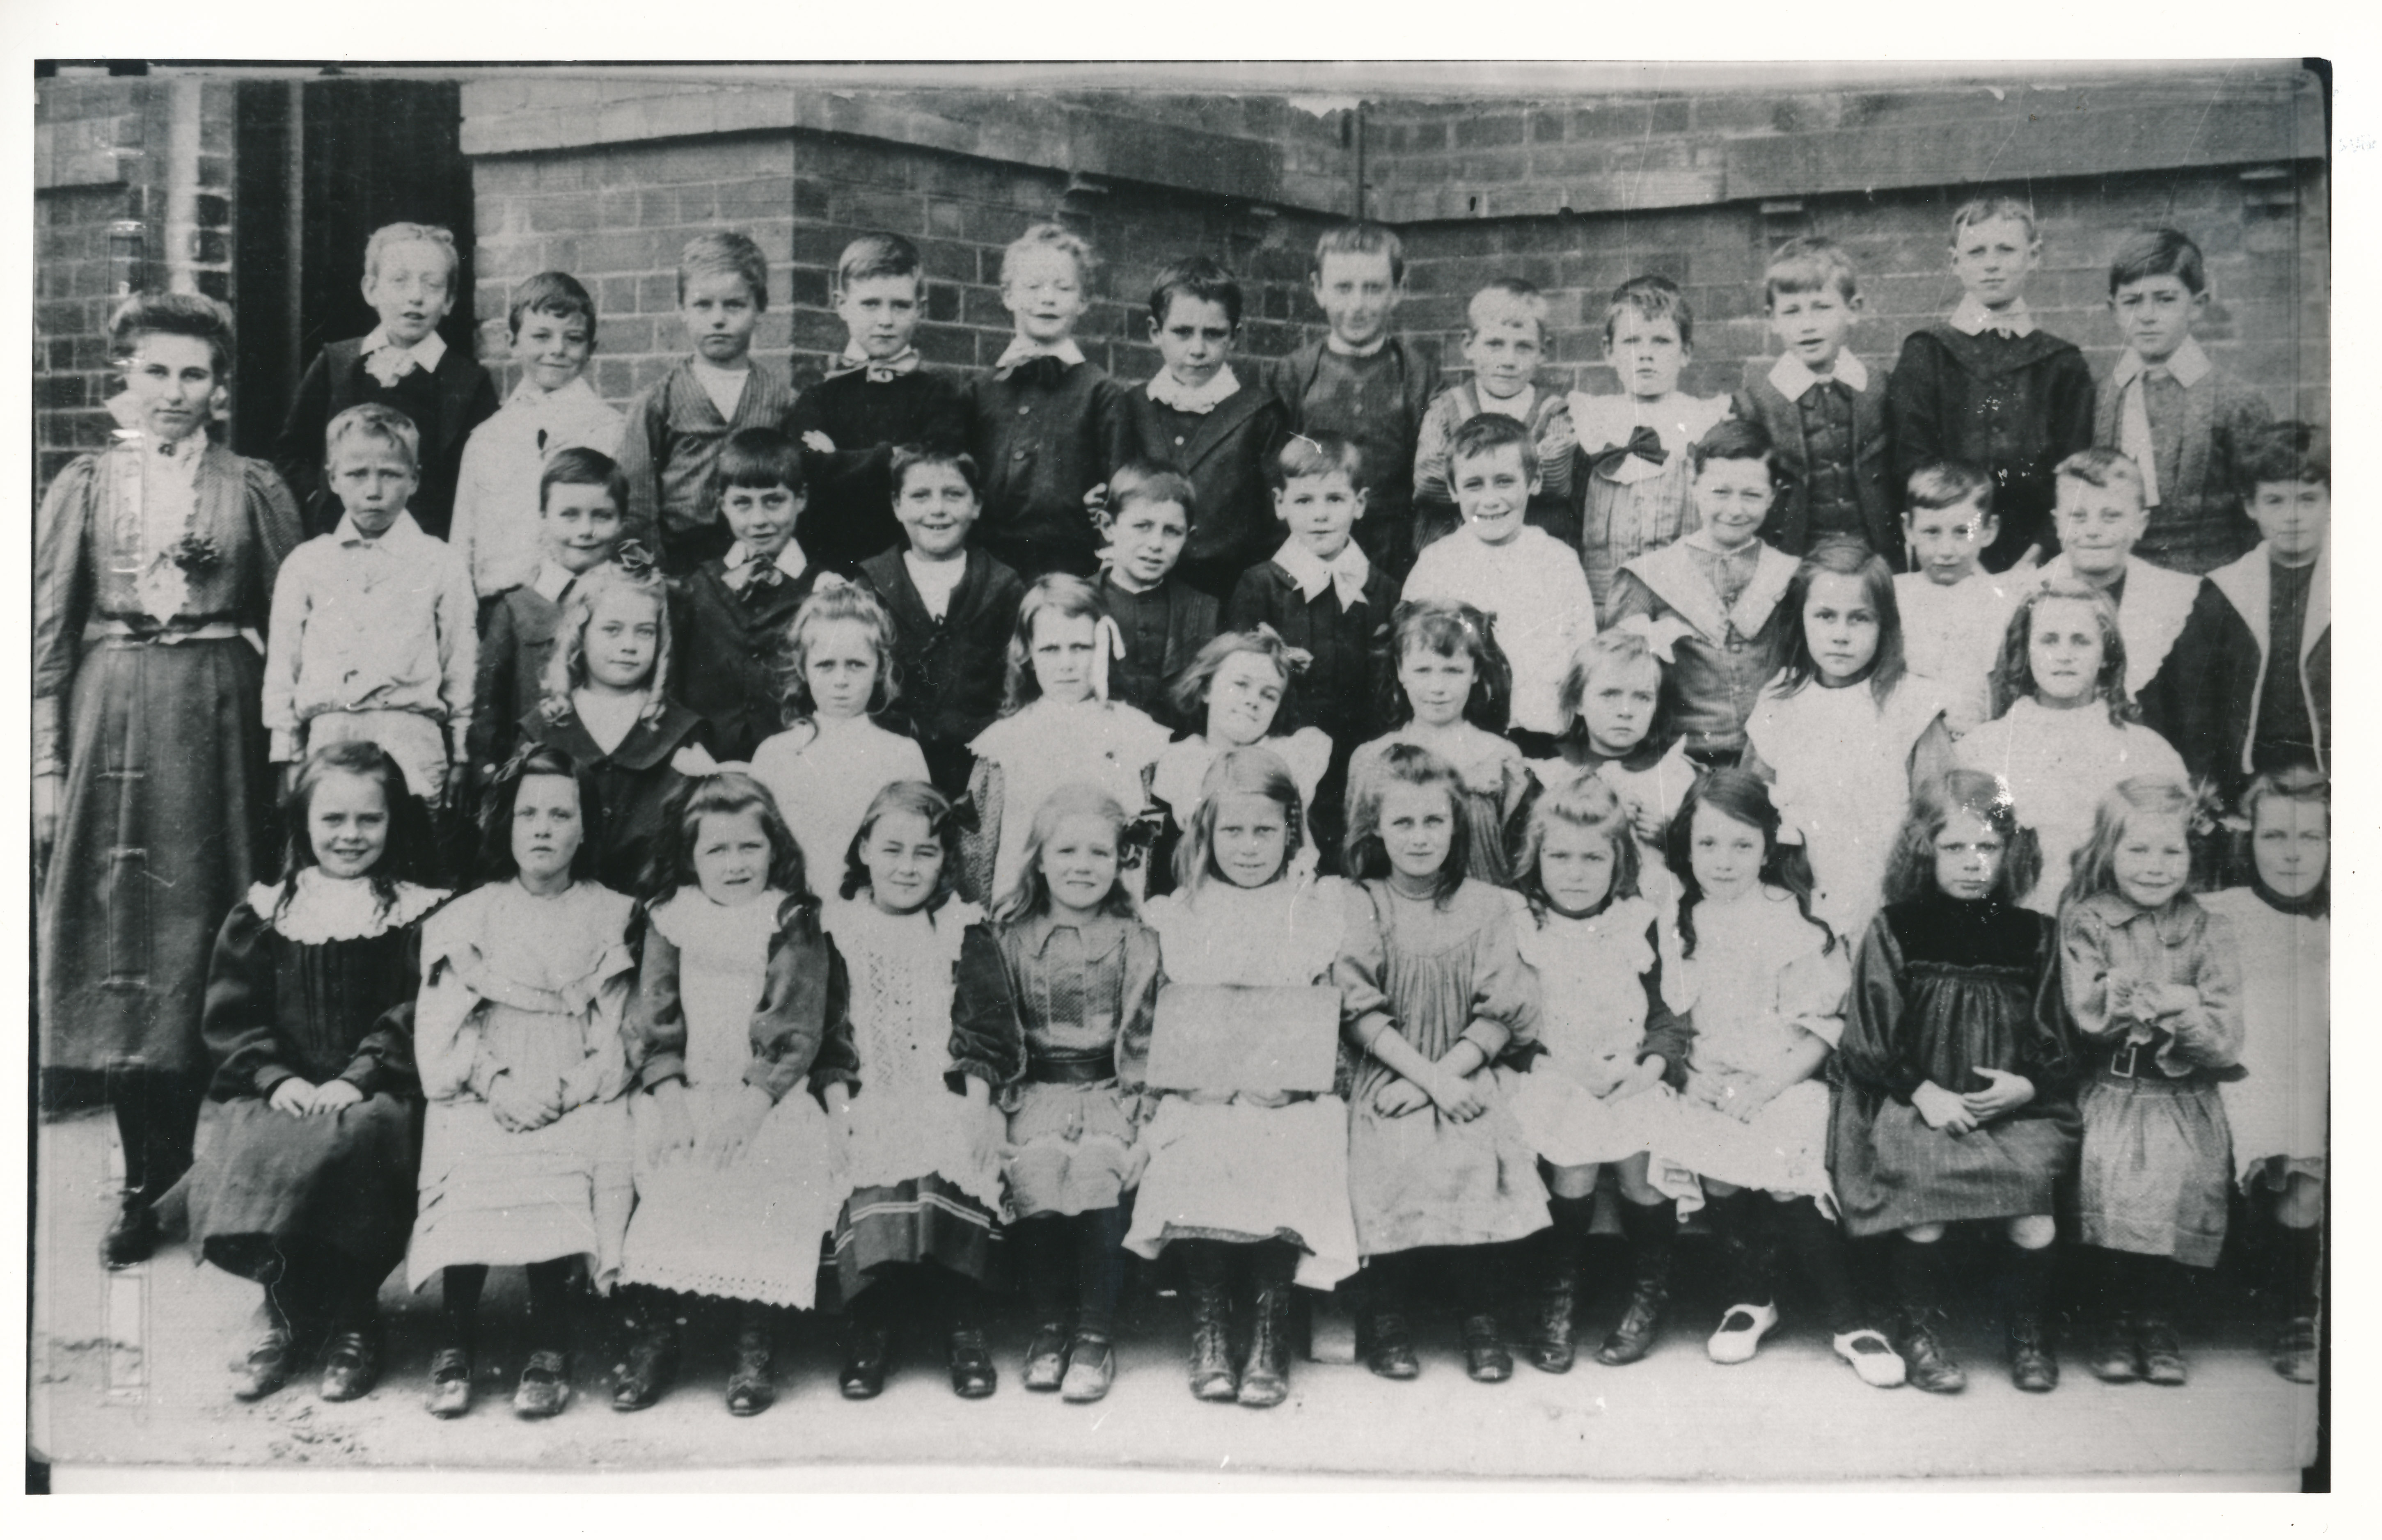 A class photo at Cambridge Street Primary School, Collingwood, 1906. Photographer unknown. Yarra Libraries, CL PIC 189.